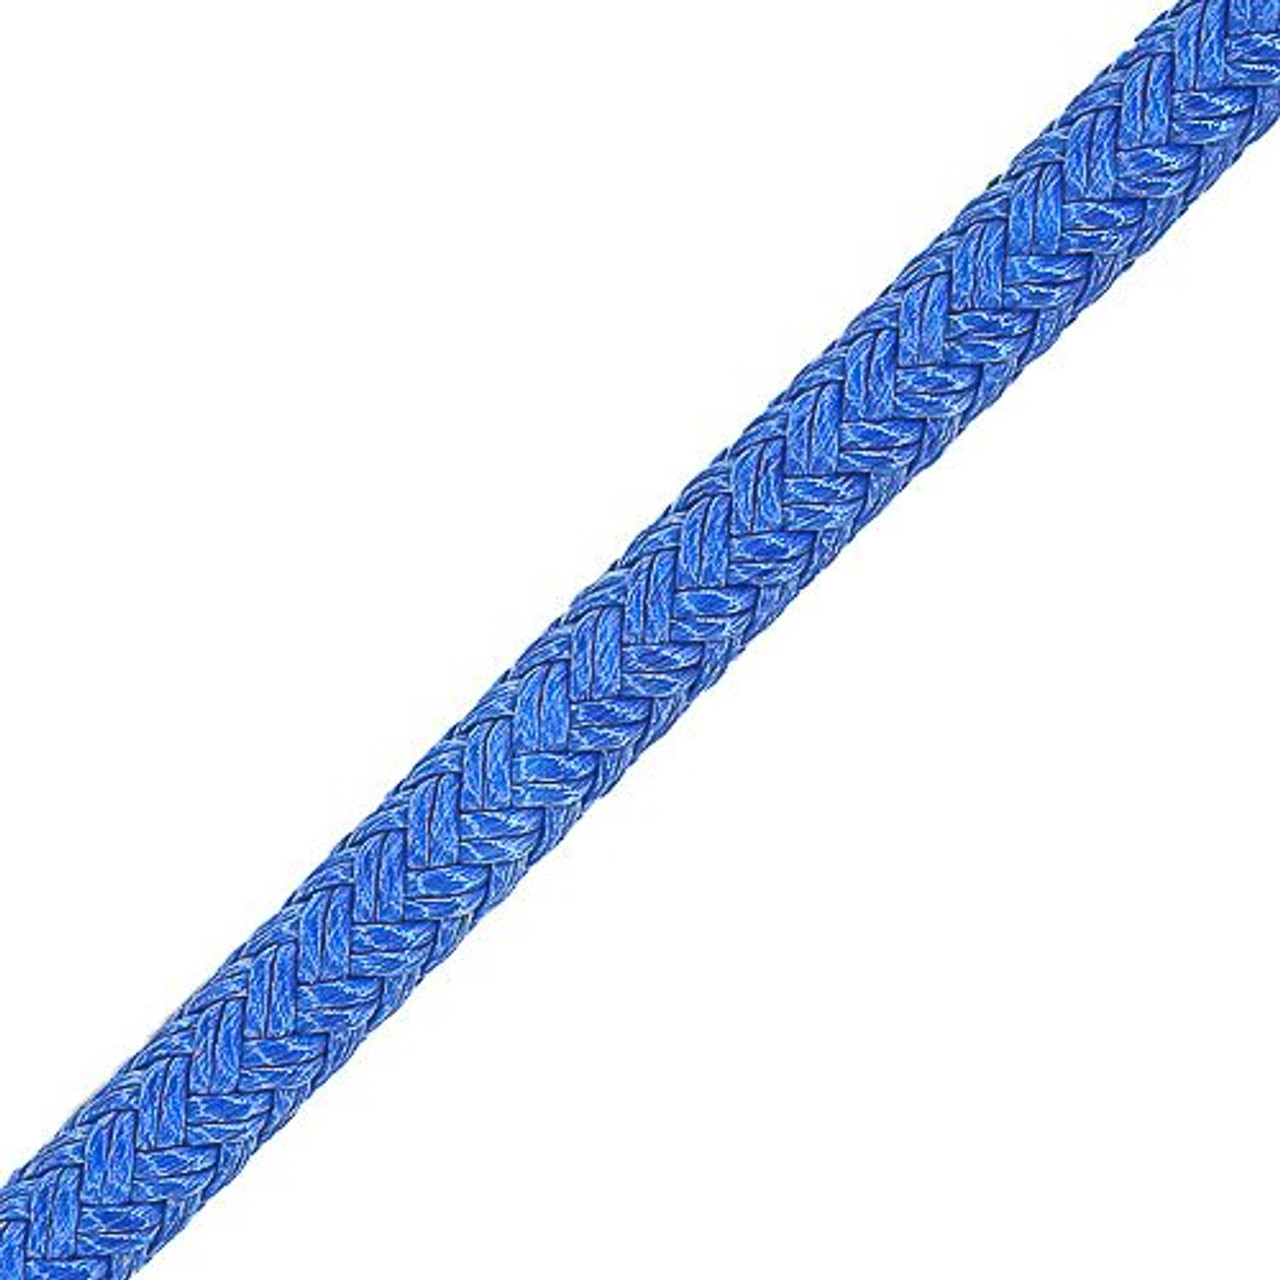 All Gear Aguh12100 Round Braid PPL Rope,1/2In dia.,100ft L, Blue